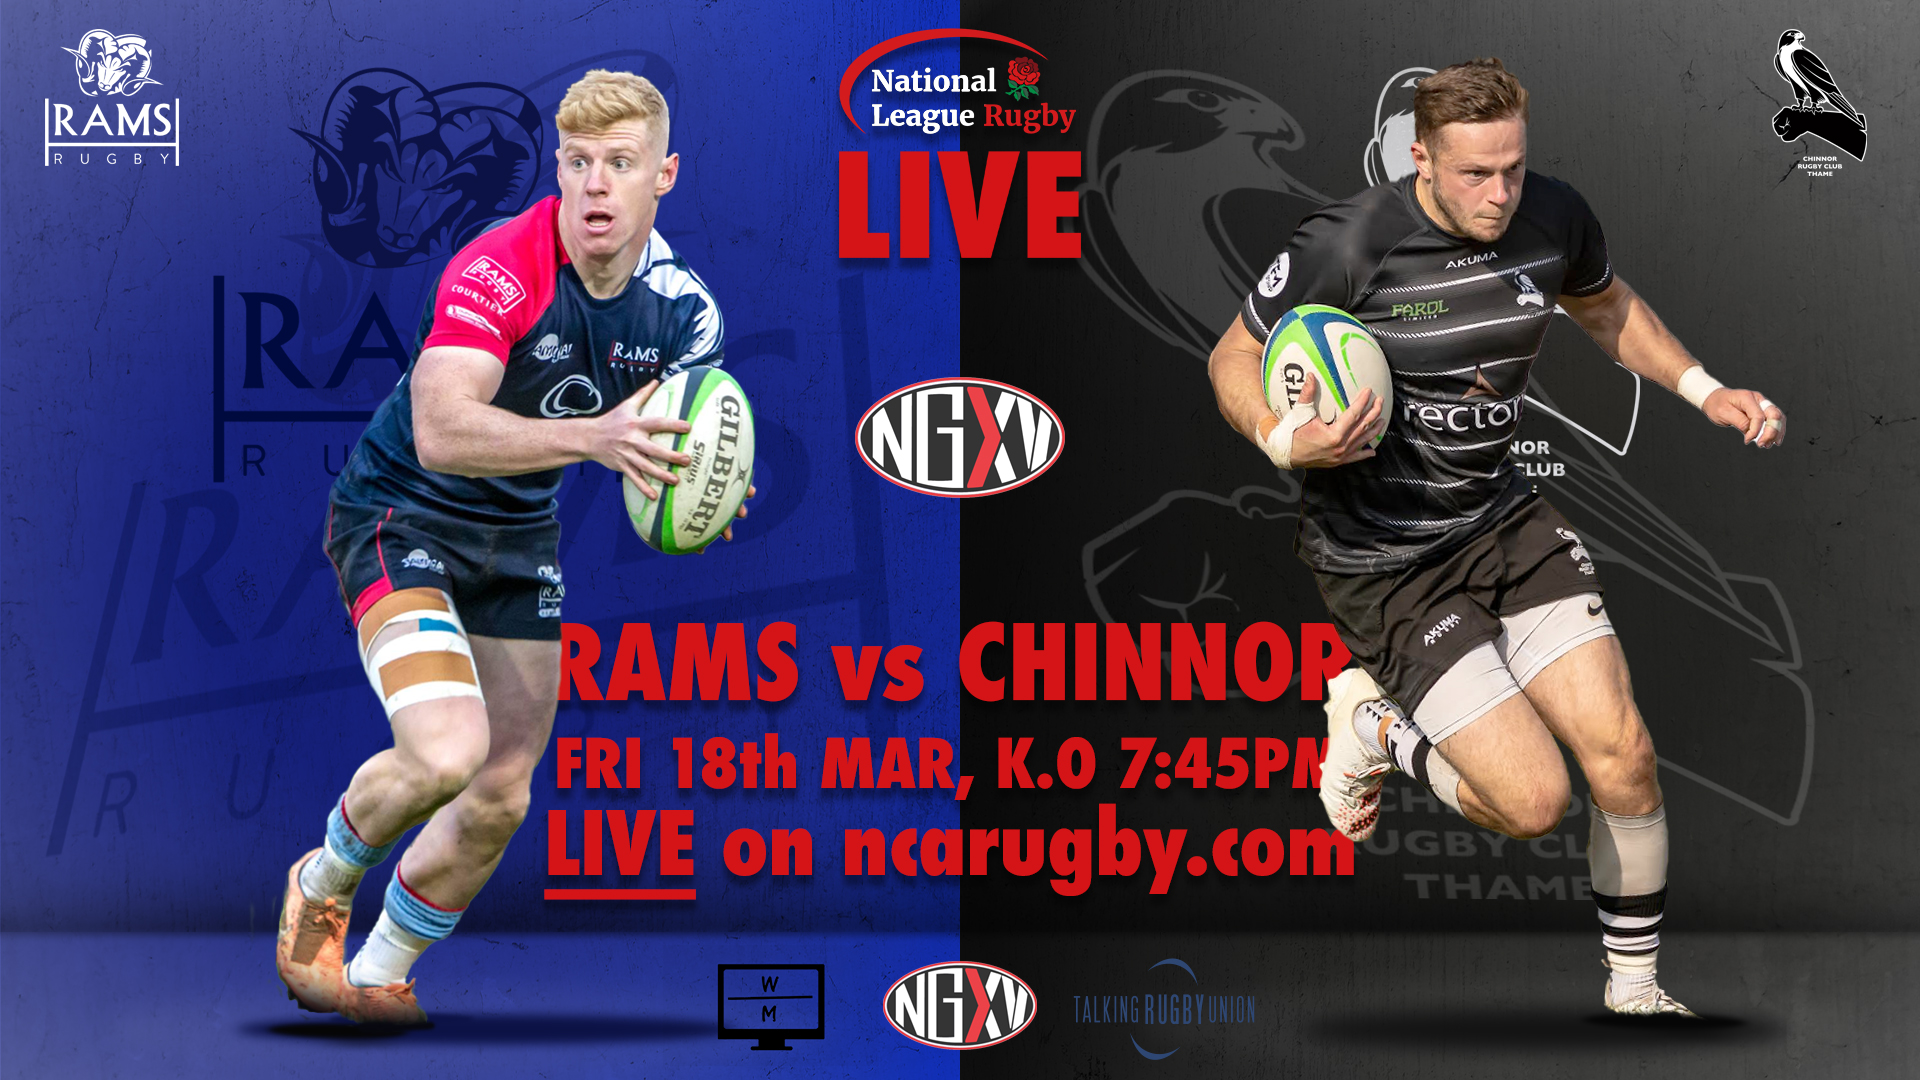 National League Rugby to Live Stream Rams RFC v Chinnor